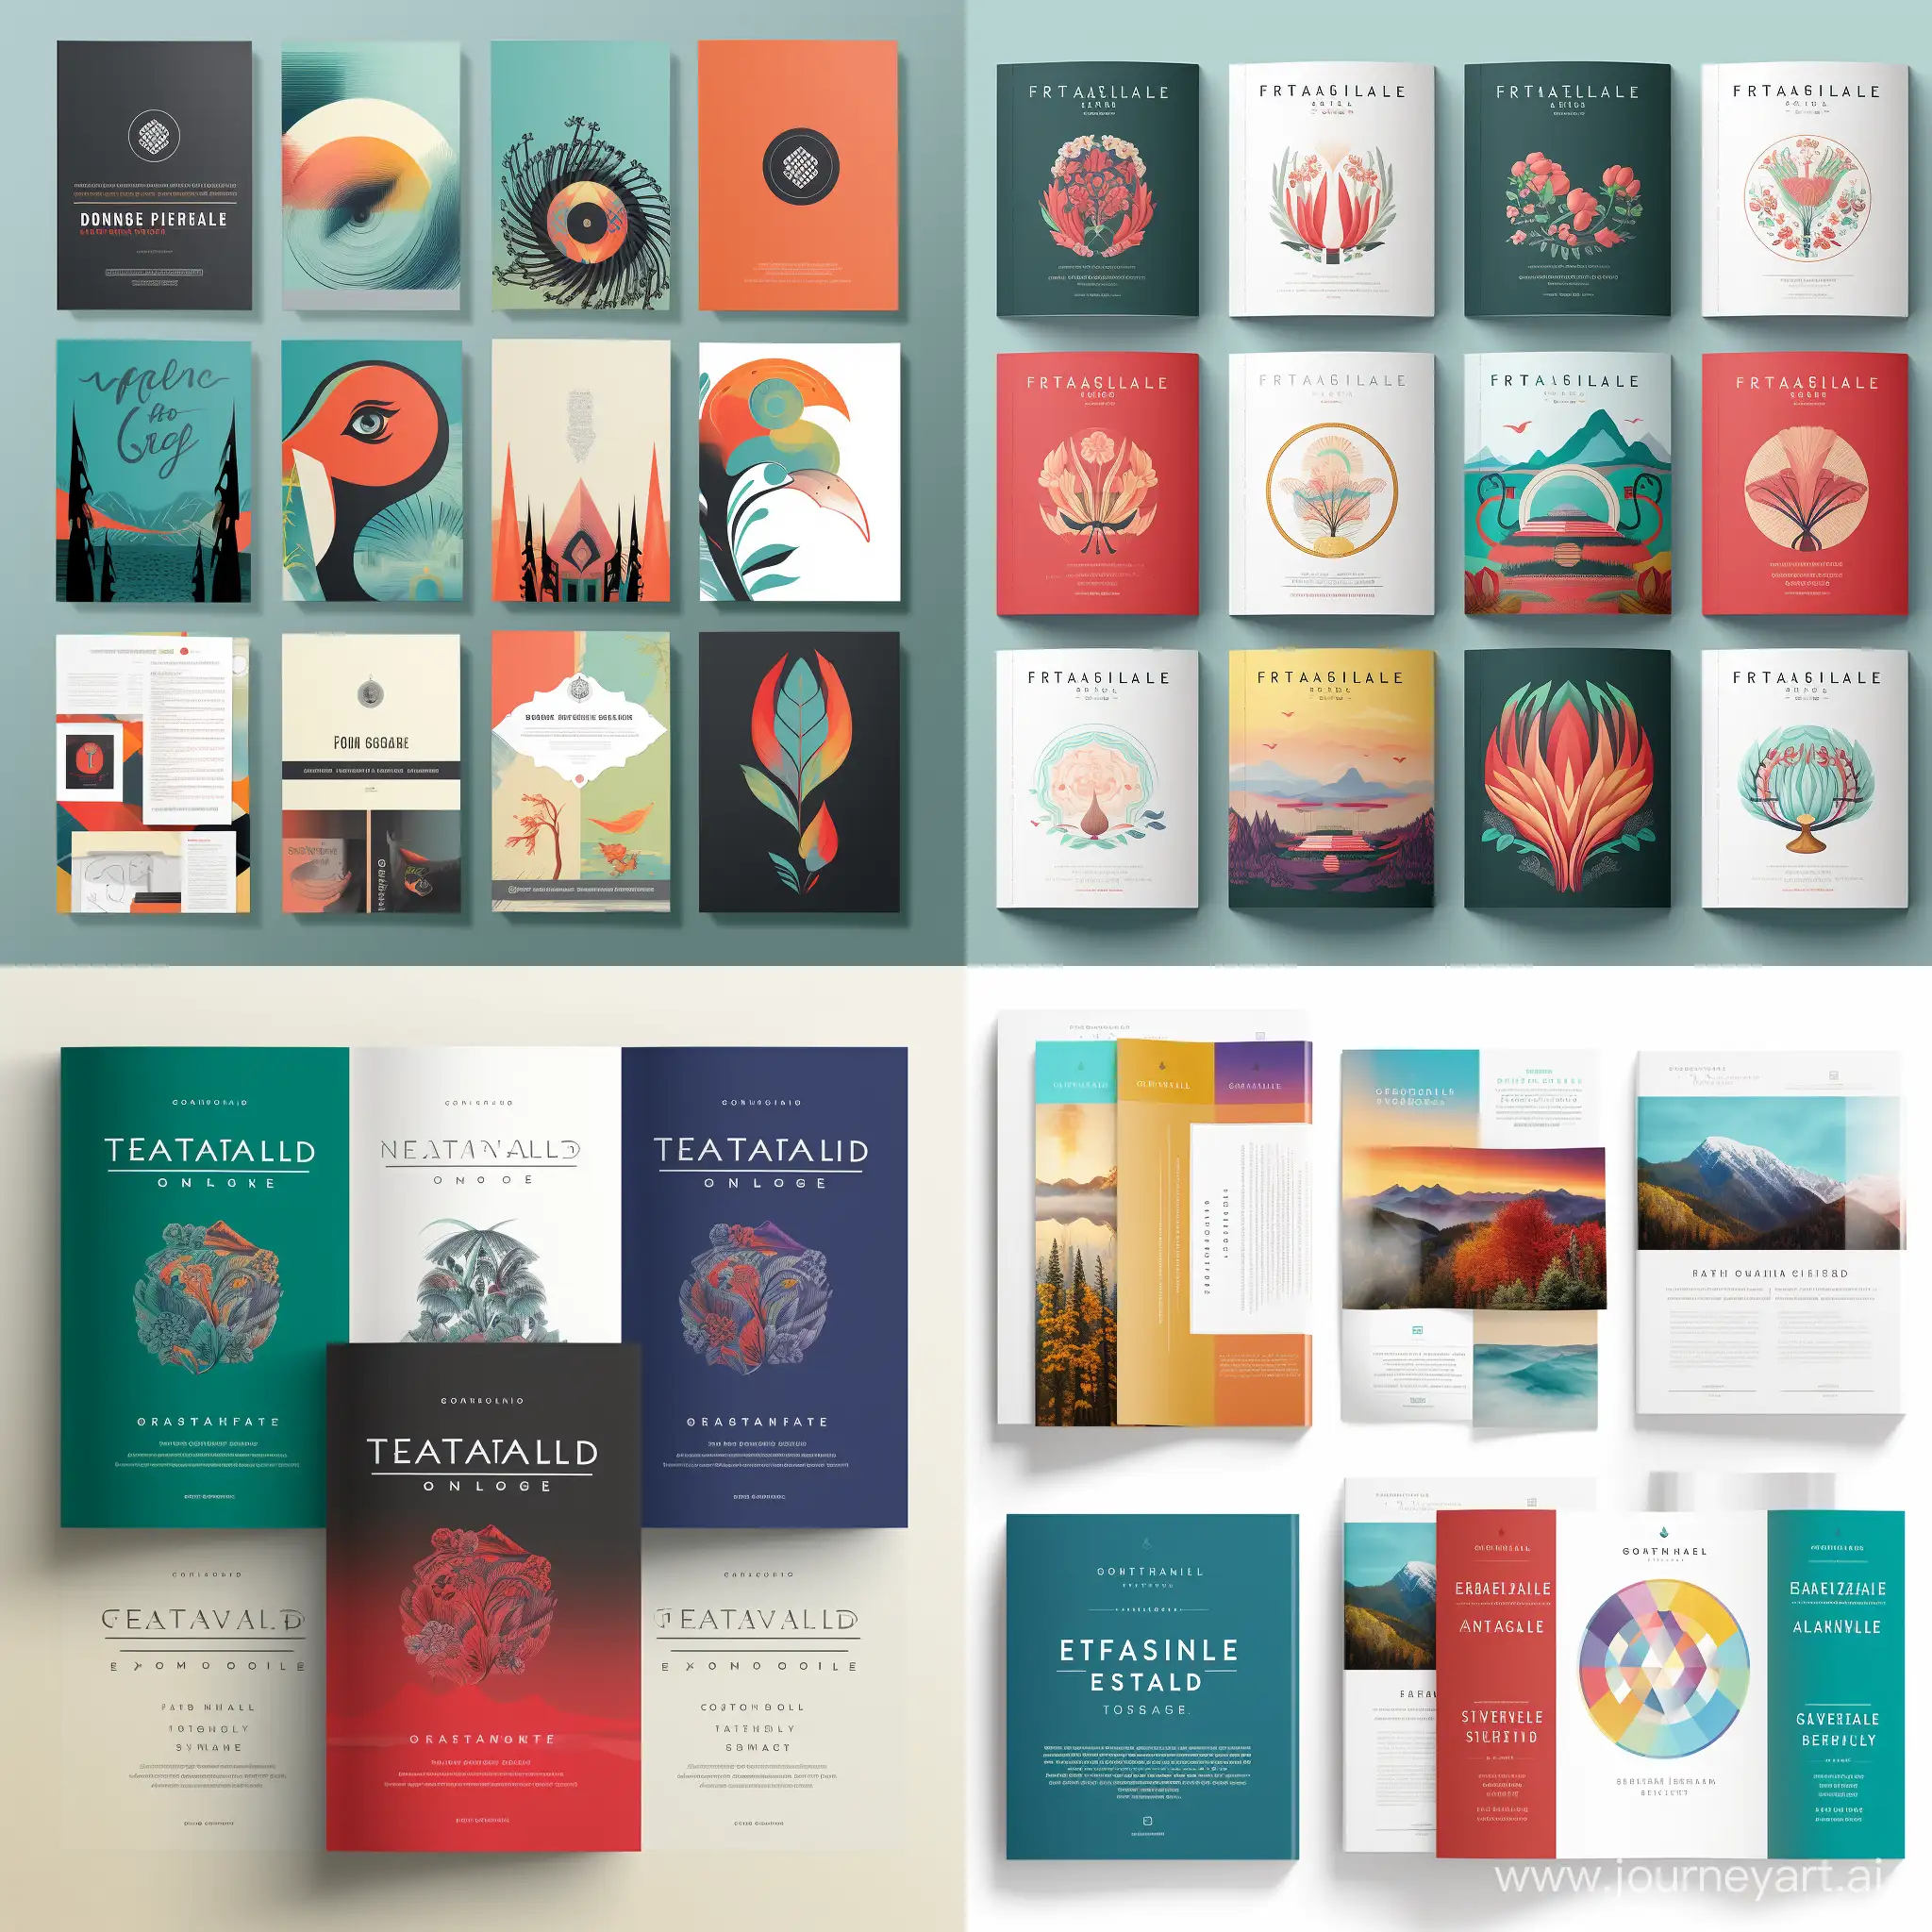 Complete Brand Style Guides and Logo Design